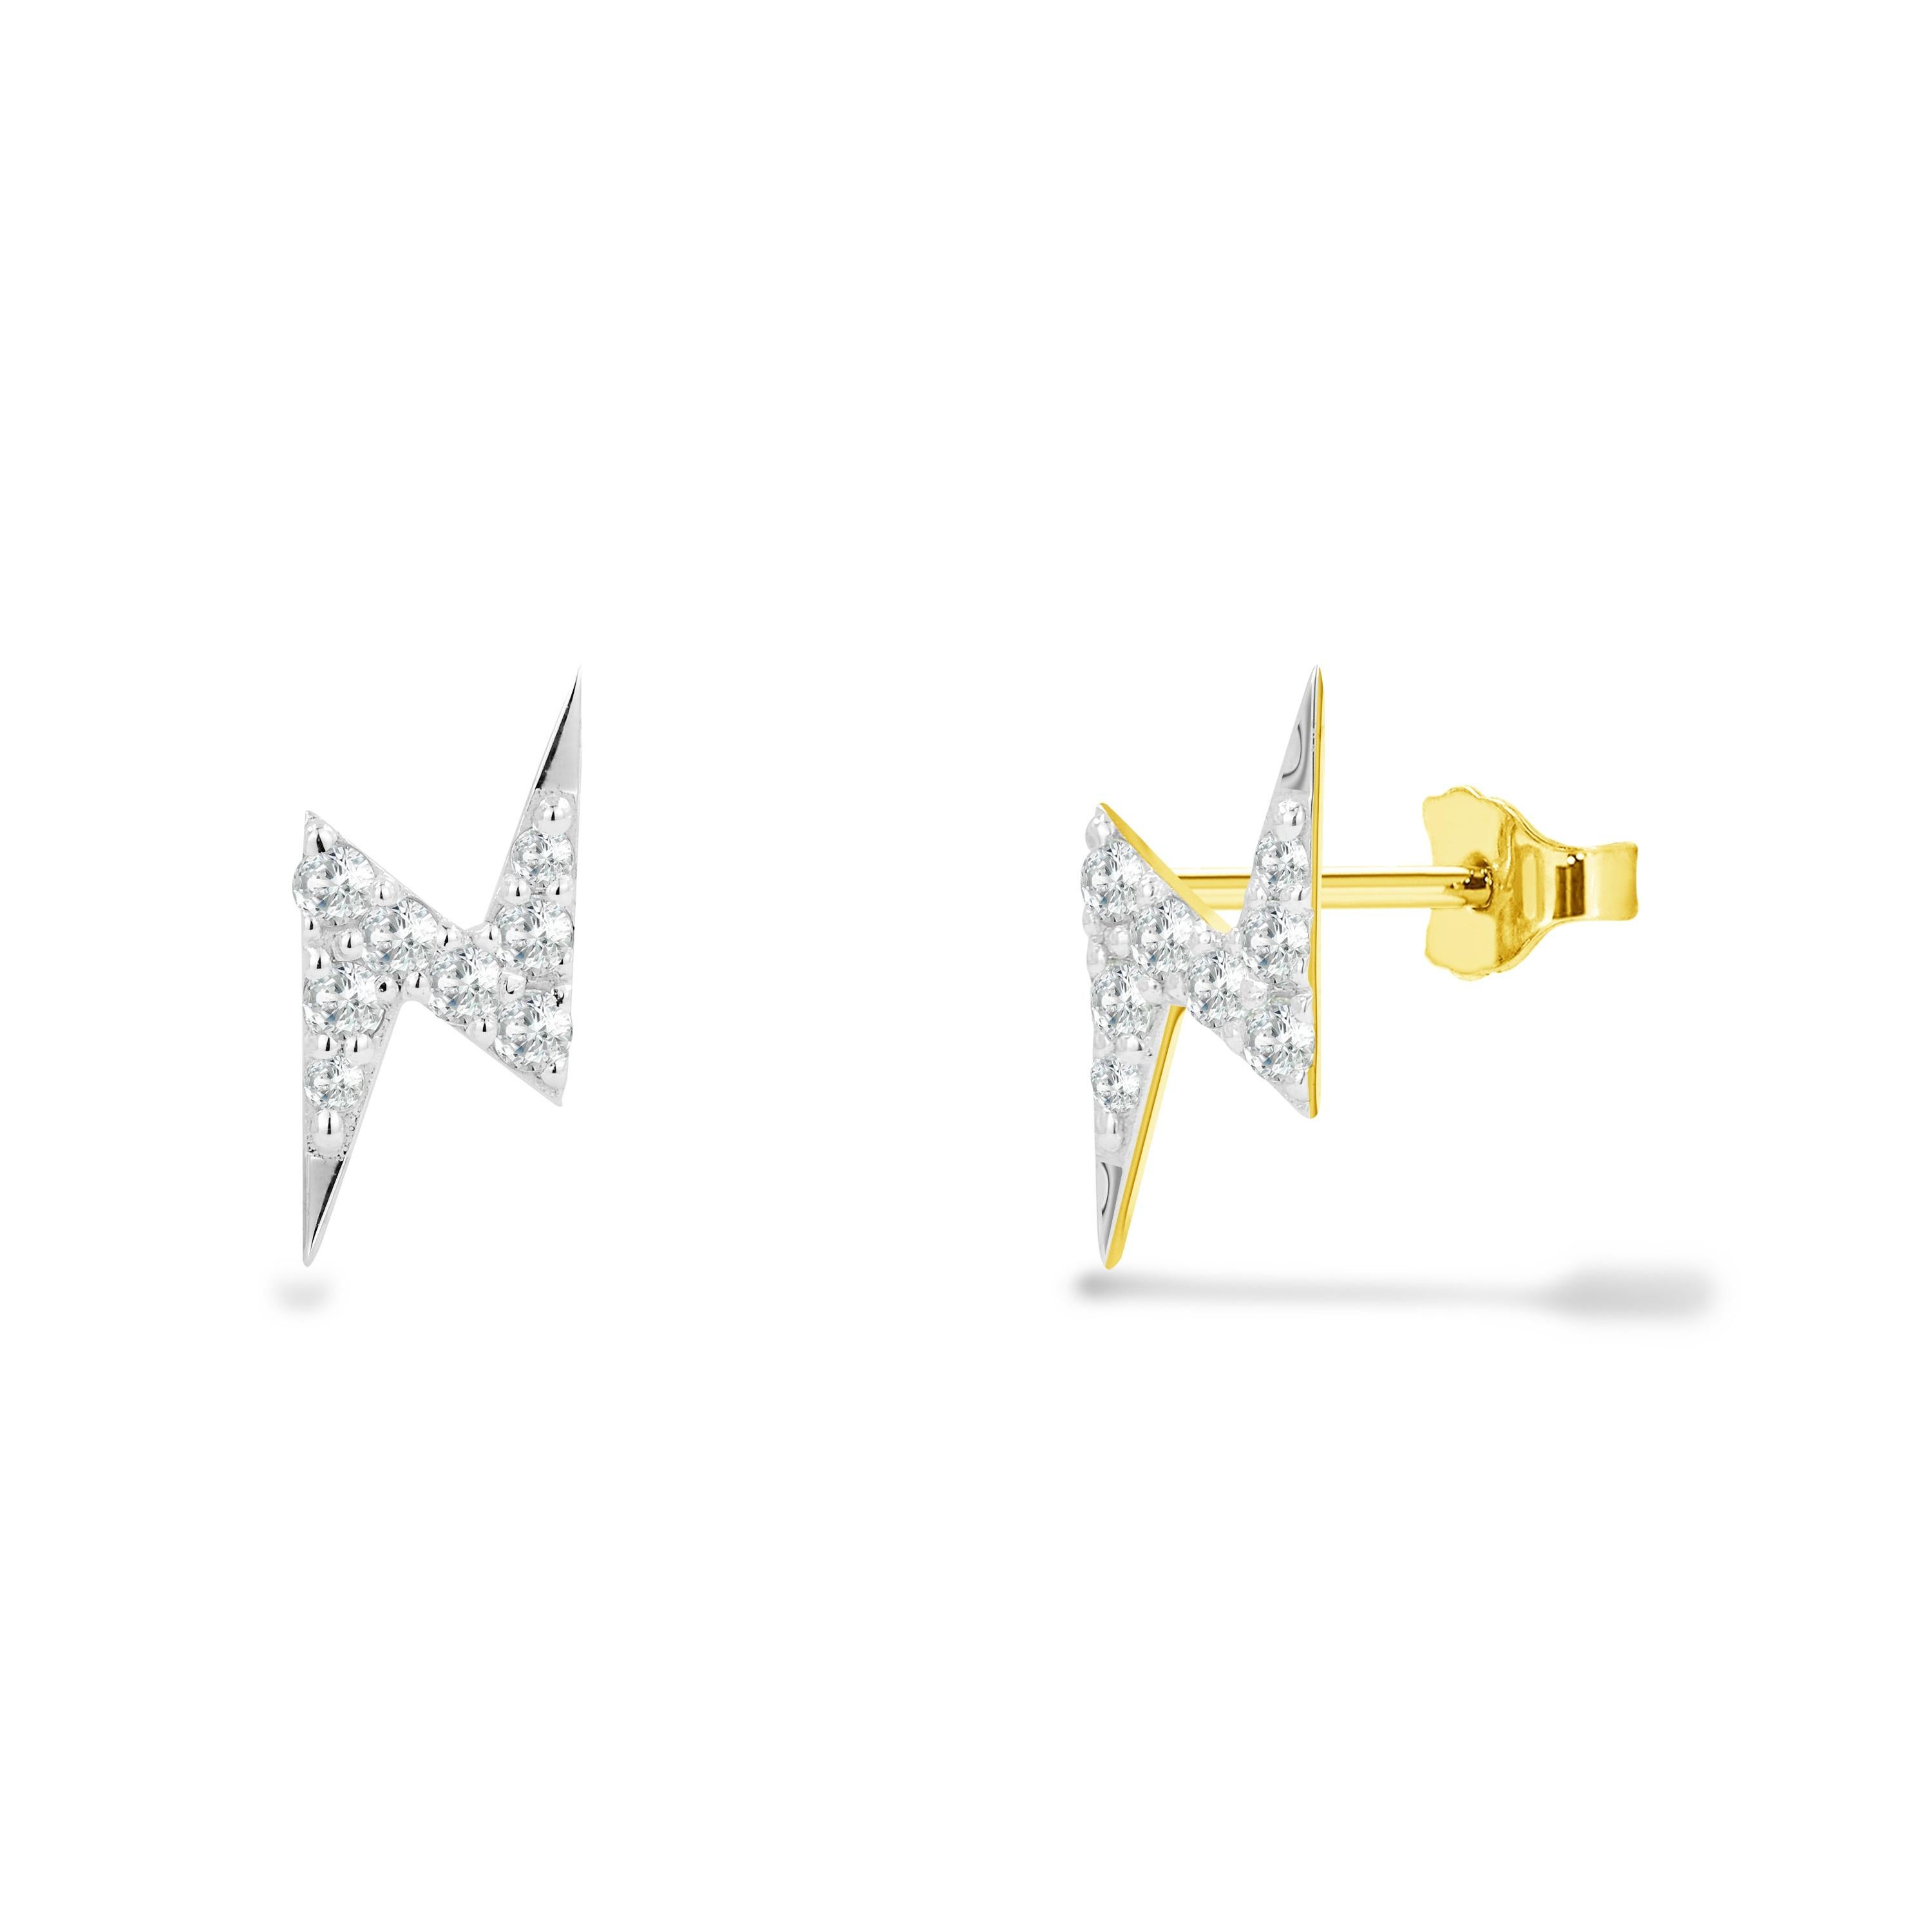 Dainty Diamond Lightning Bolt Stud Earrings 14k Rose Gold, Yellow Gold, White Gold.

These Dainty Stud Earrings are made of 14k solid gold featuring shiny brilliant round cut natural diamonds set by a master setter in our studio. Simple but unique,